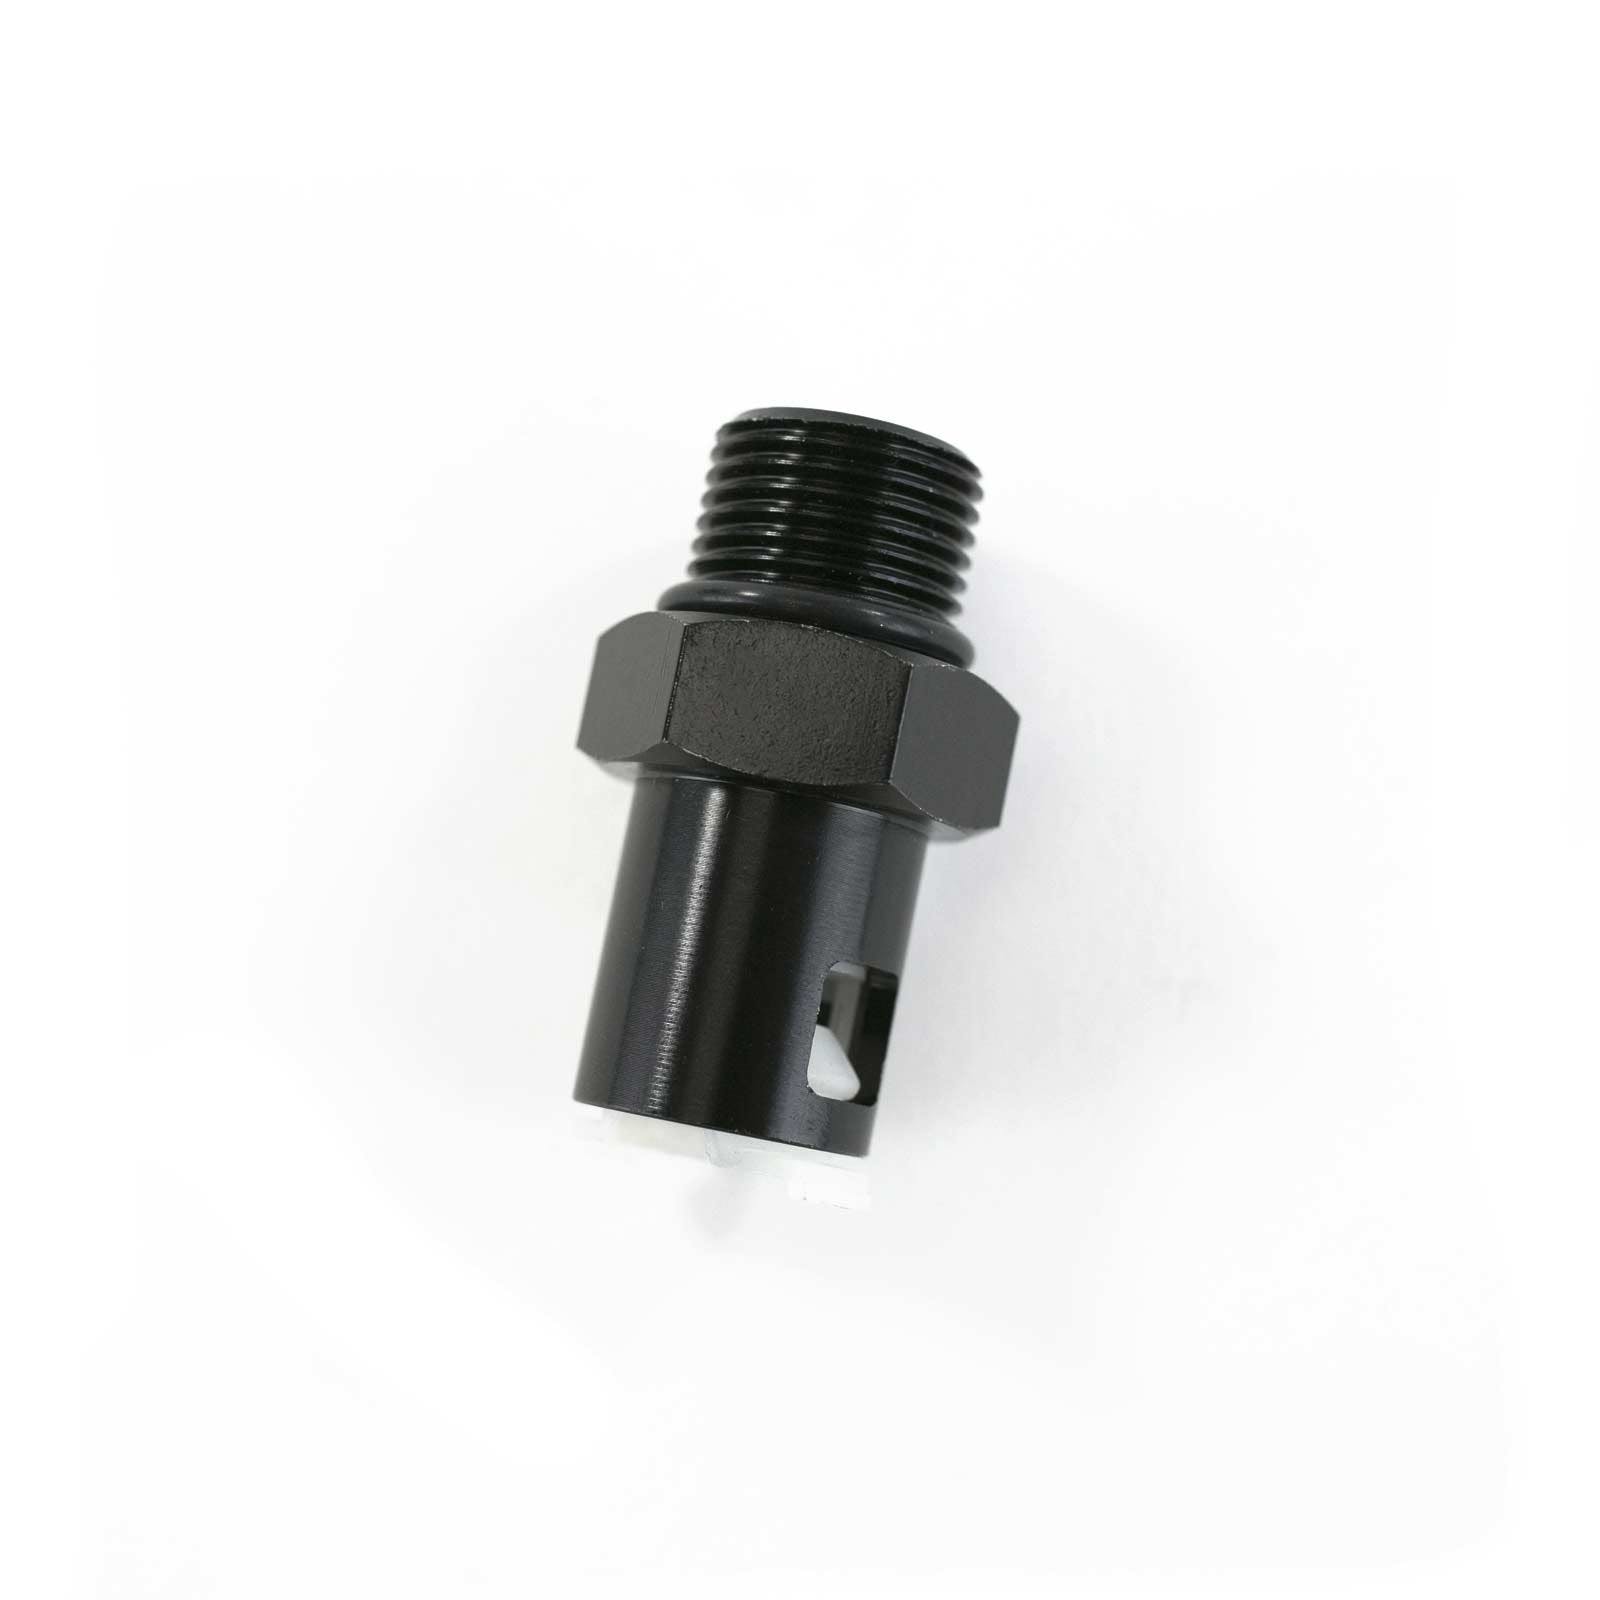 Top Street Performance 81098 Quick Disconnect Female Adapter Fitting